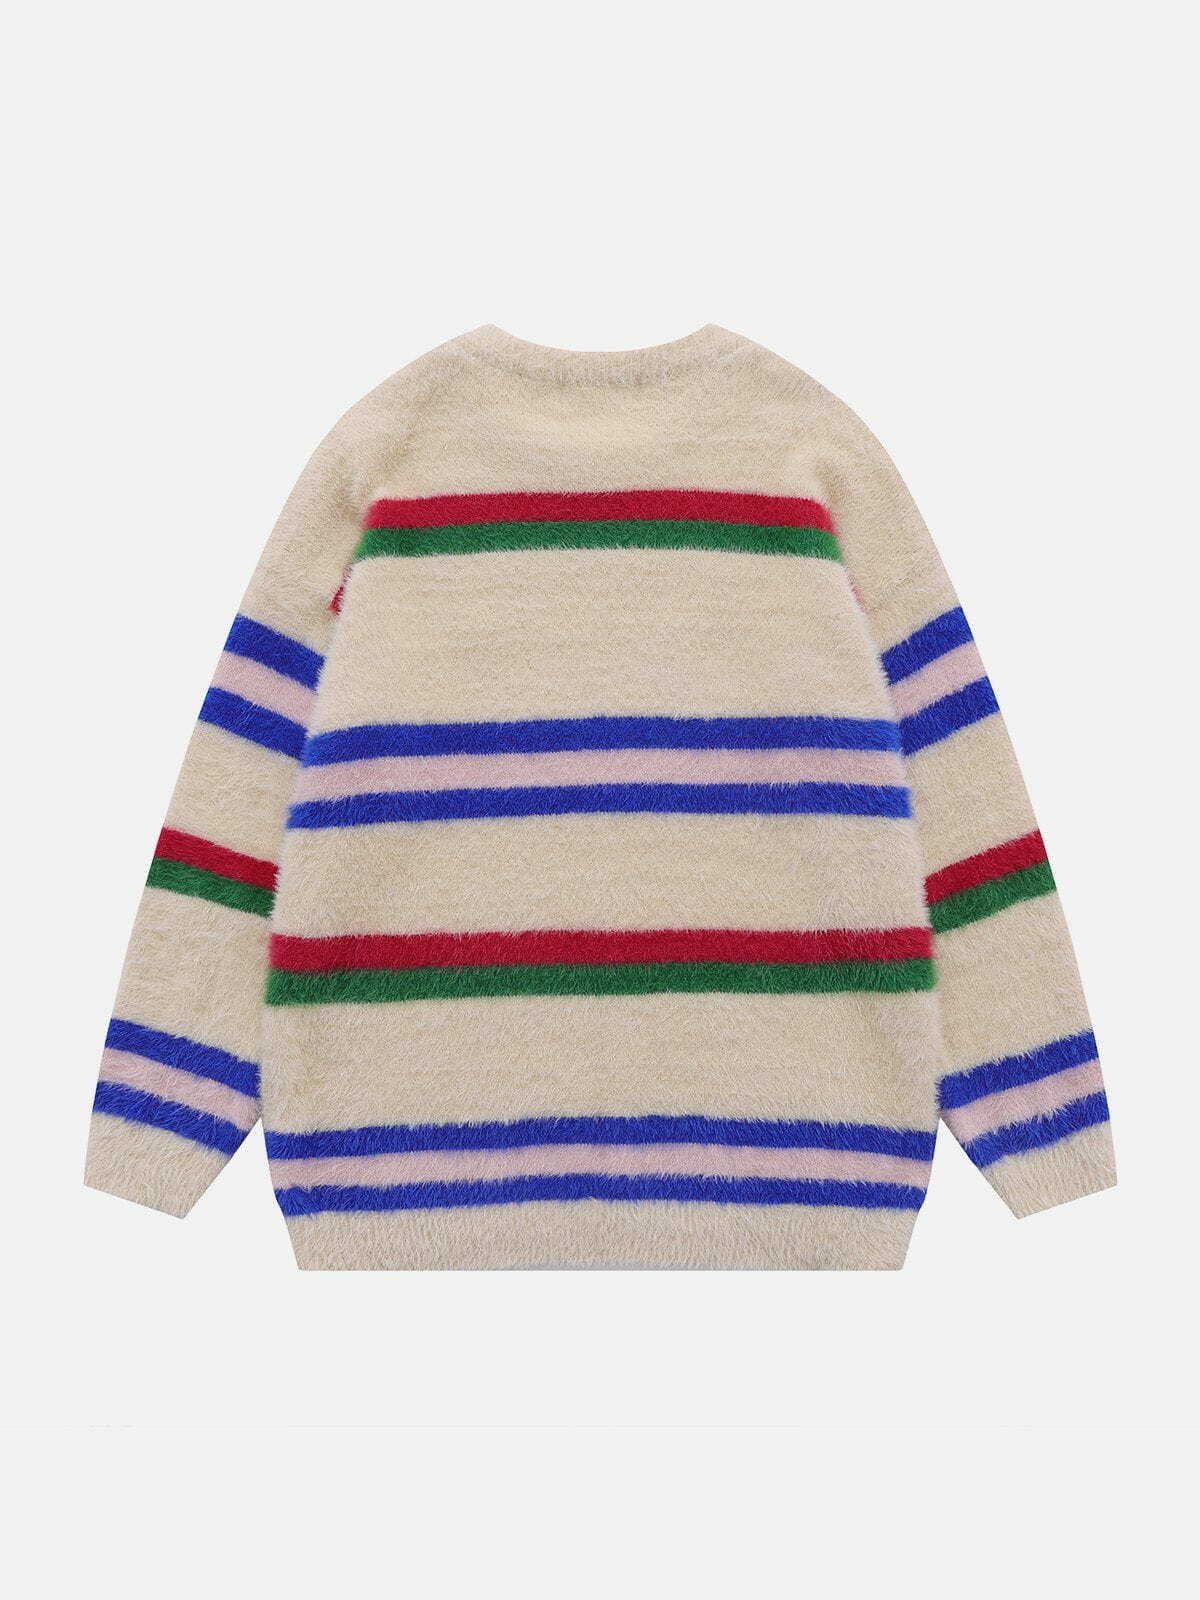 colorful striped letter sweater edgy retro streetwear statement 2451